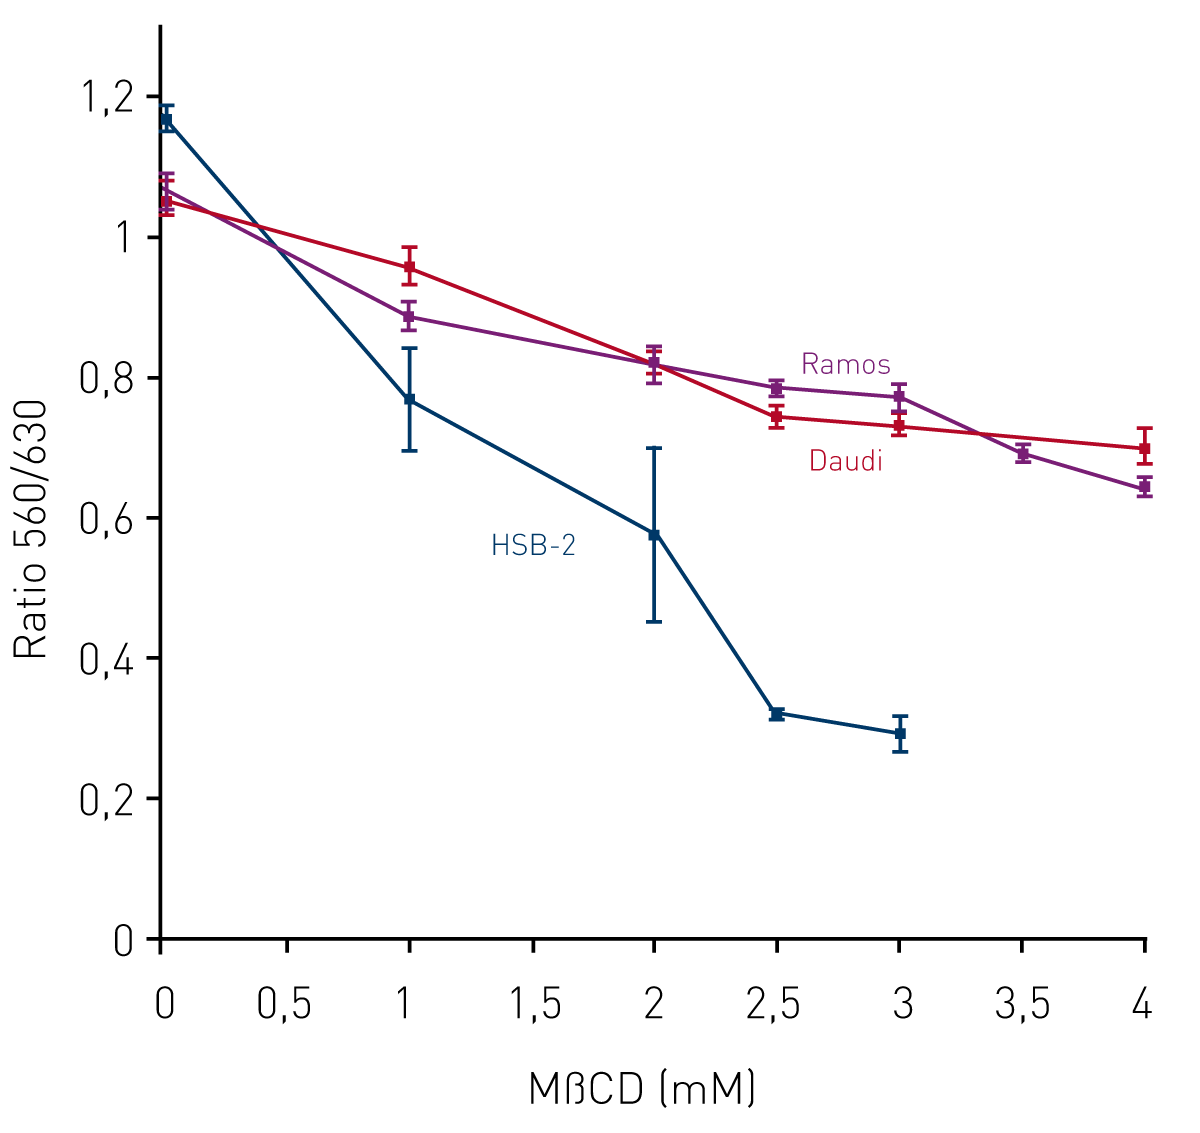 Fig. 2: Ratio of the emission intensities at 560 and 630nm of NR12S in Daudi (red), Ramos (purple) and HSB-2 (black) cells incubated with MẞCD for 1 hour.